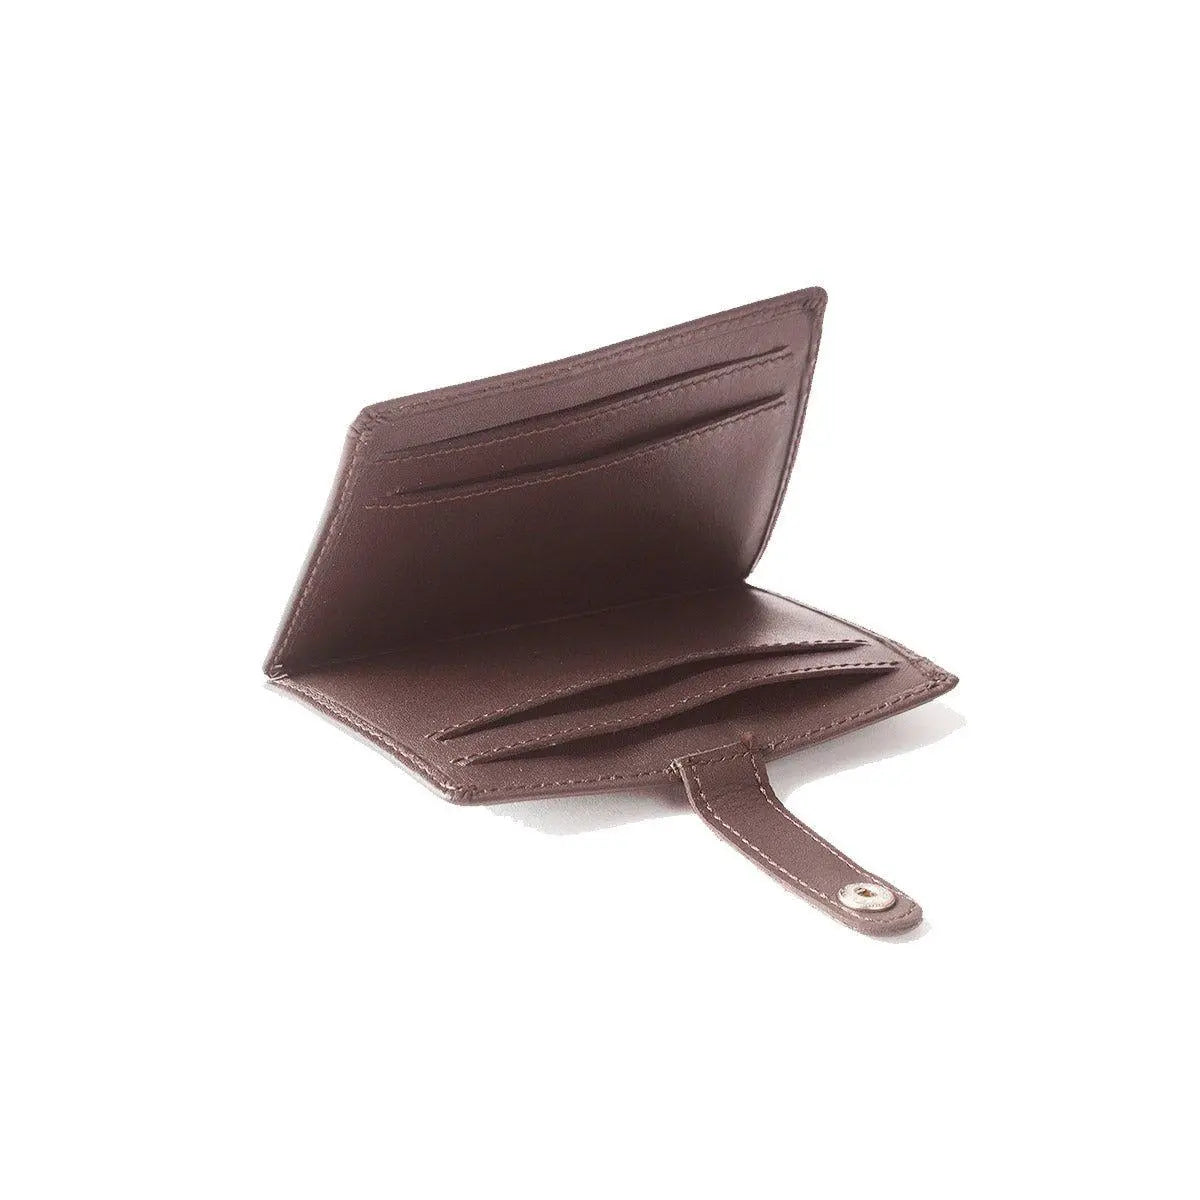 Grid Card Holder for 08 pieces in Genuine Leather - Brown Bear